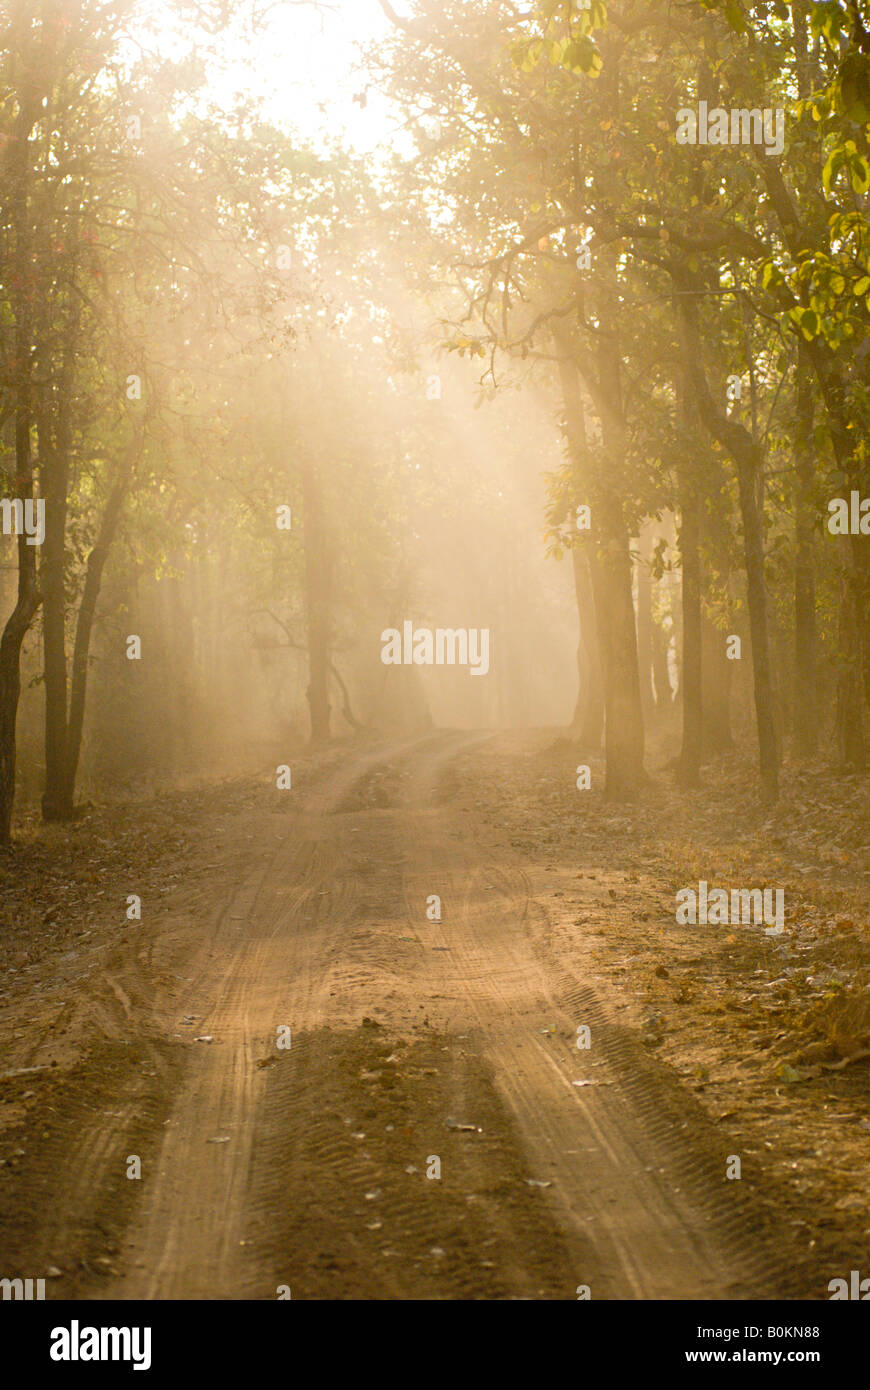 Dusty forest road Bandhavgarh Tiger Reserve early morning Stock Photo